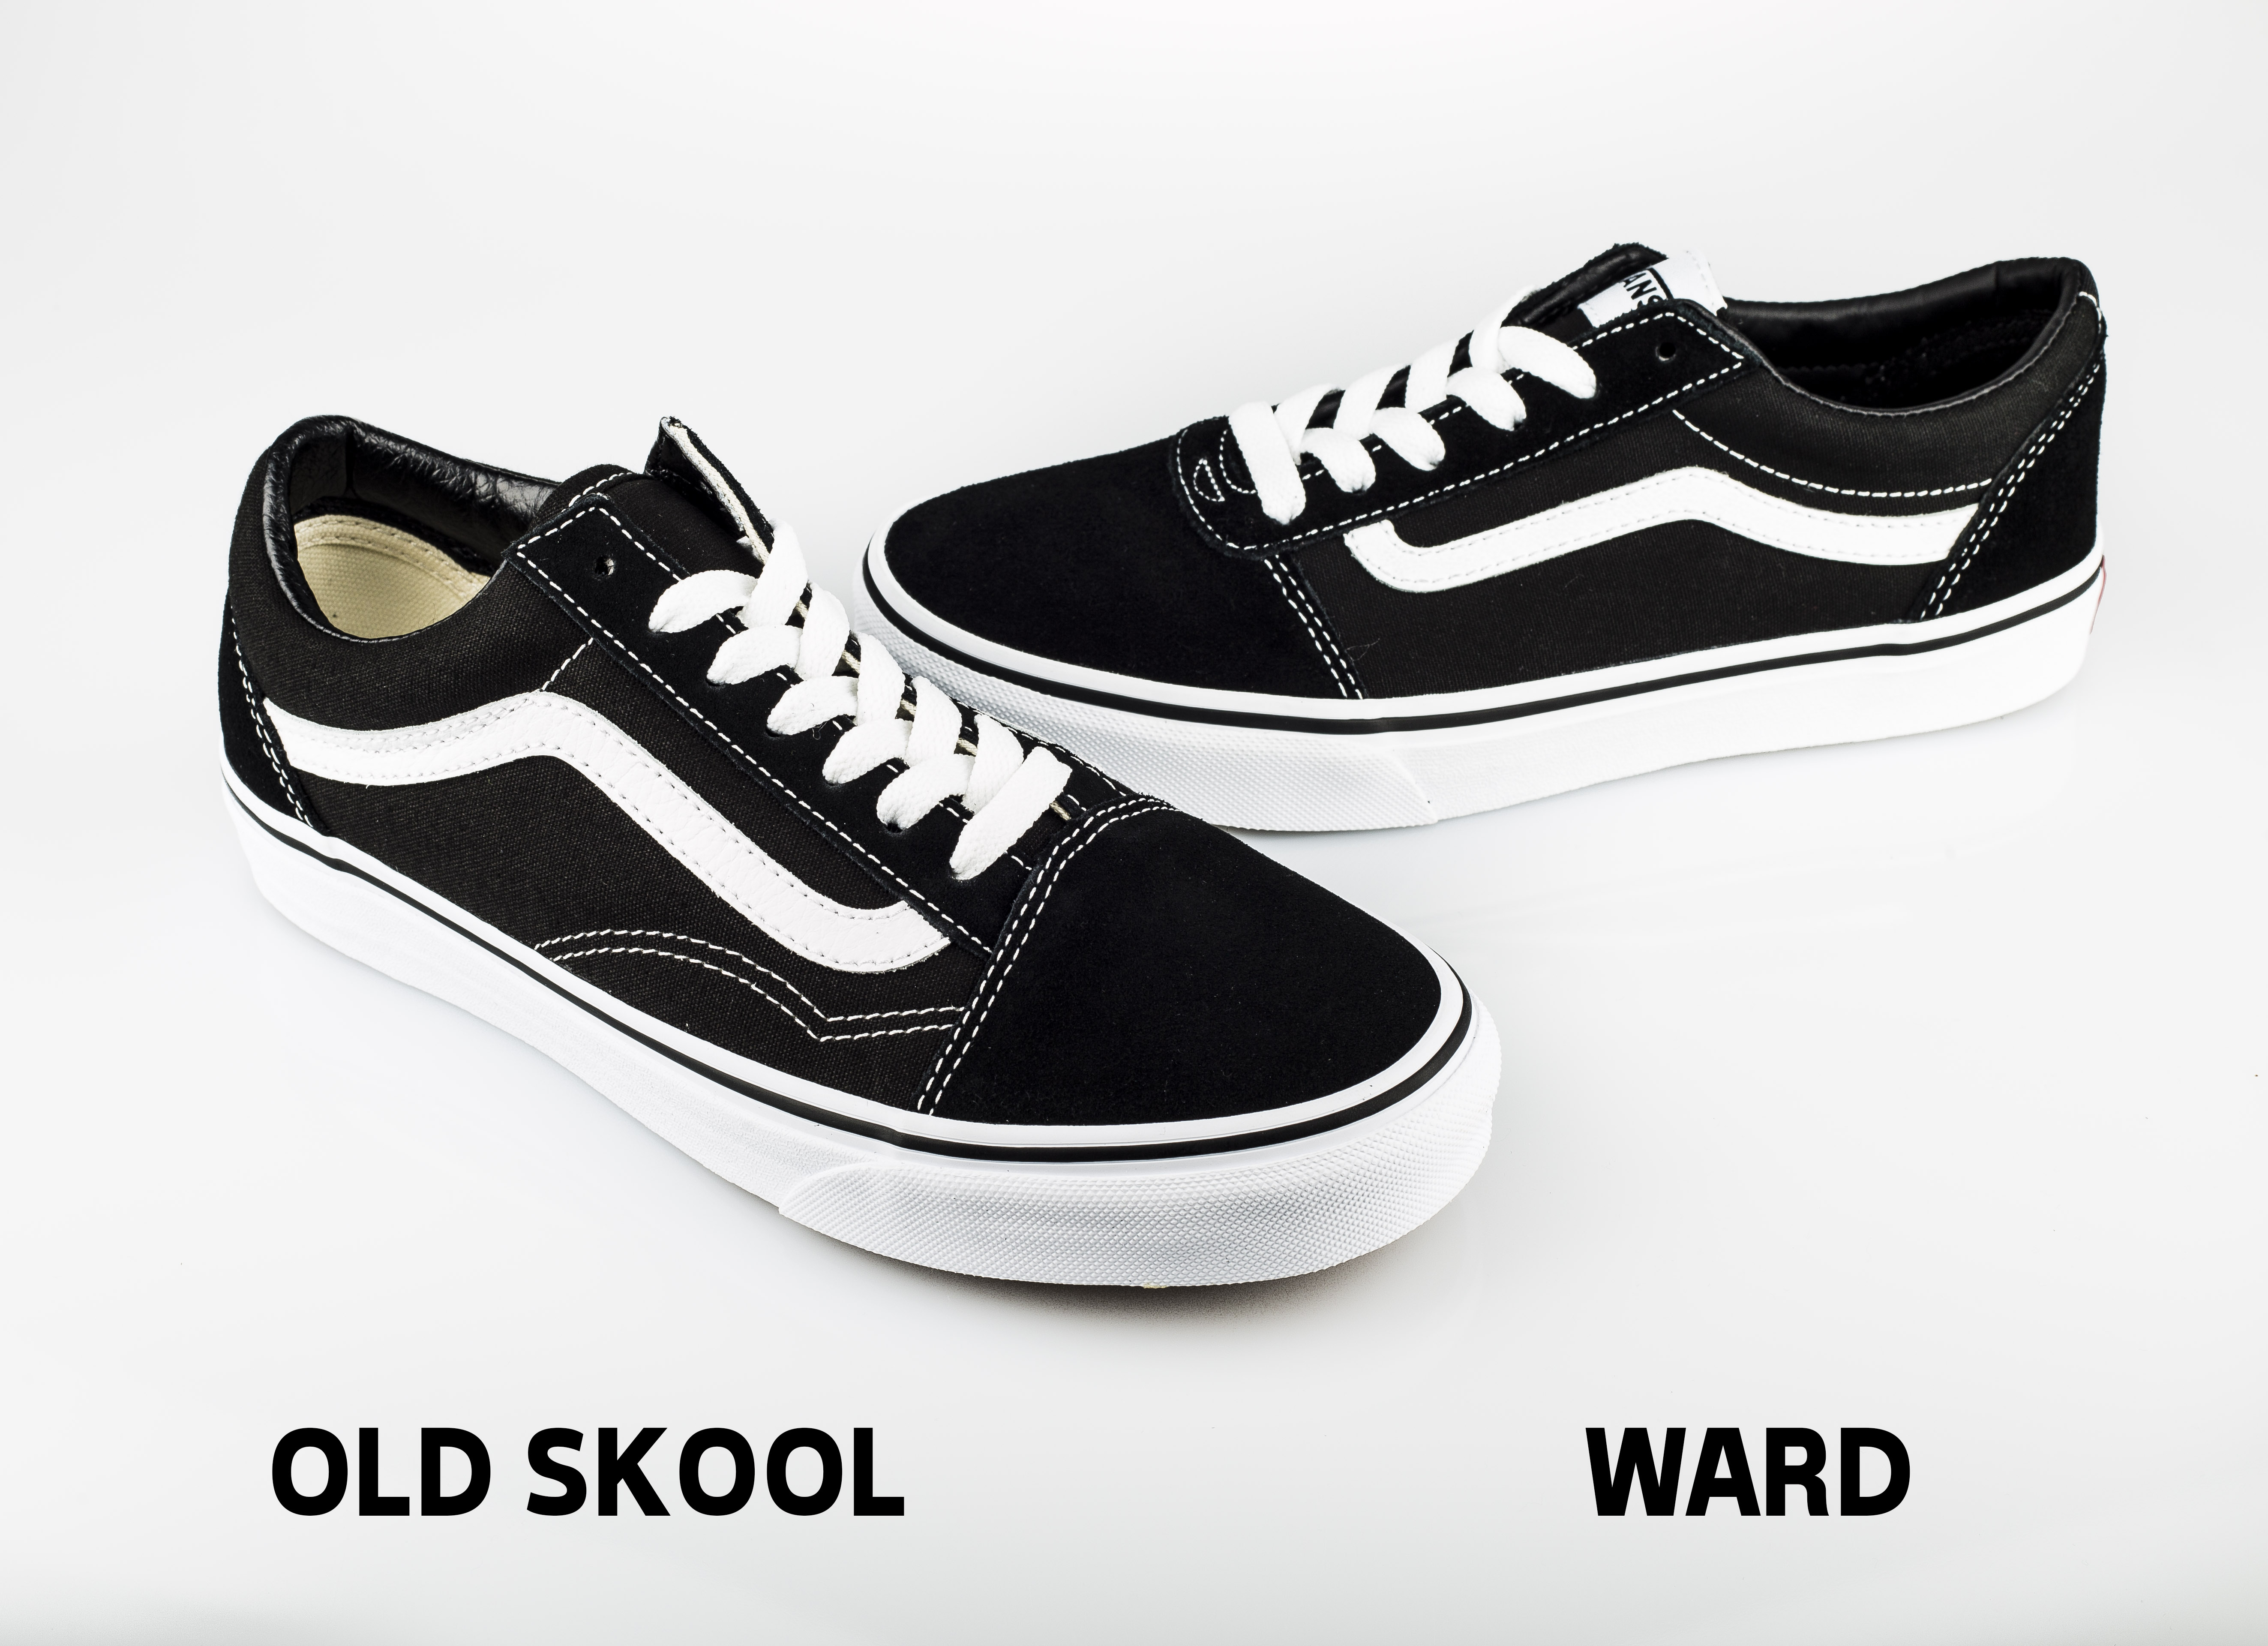 difference between old skool and old skool pro